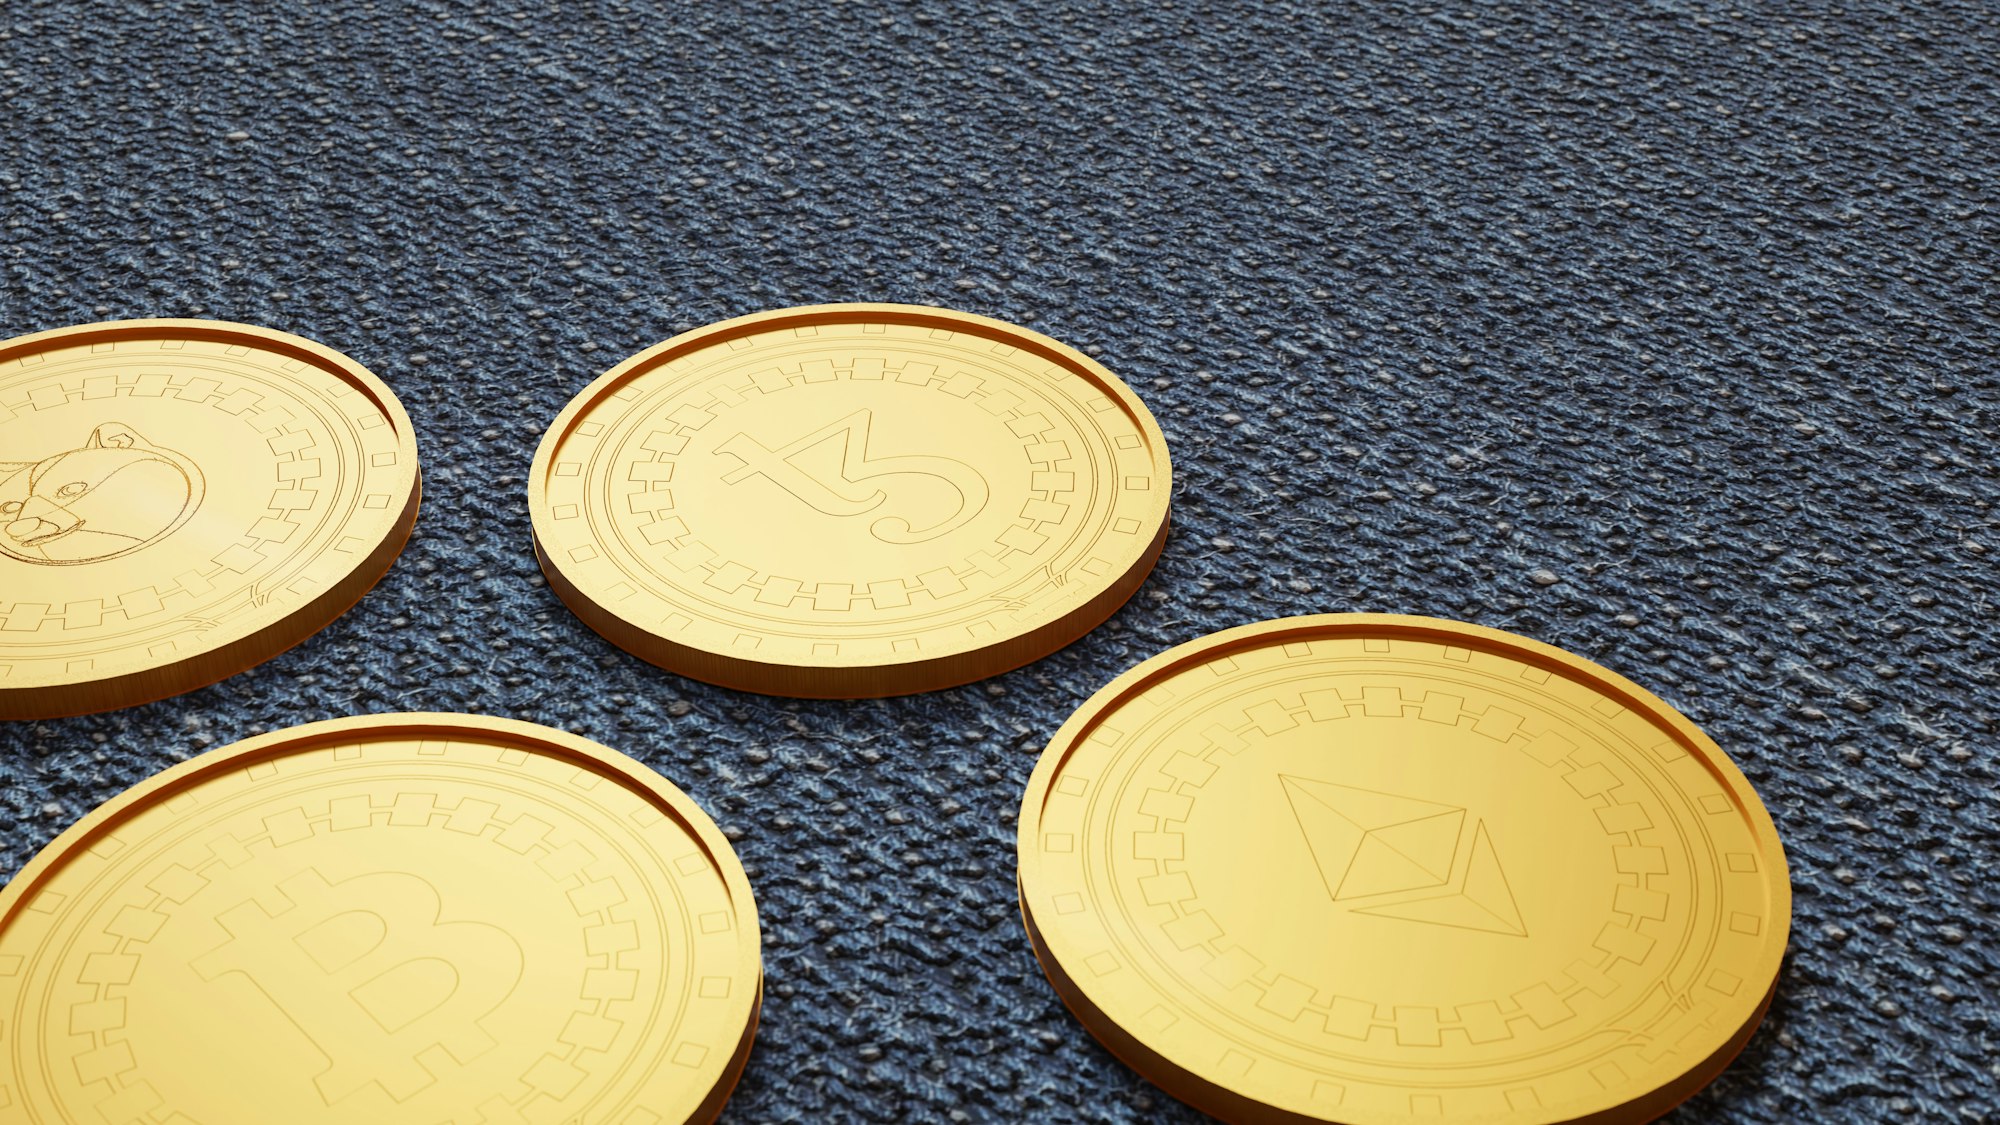 3D illustration of tezos coin, bitcoin, dogecoin, and ethereum.
 Tezos is a blockchain designed to evolve.
「 LOGO / BRAND / 3D design 」 
WhatsApp: +917559305753
 Email: shubhamdhage000@gmail.com